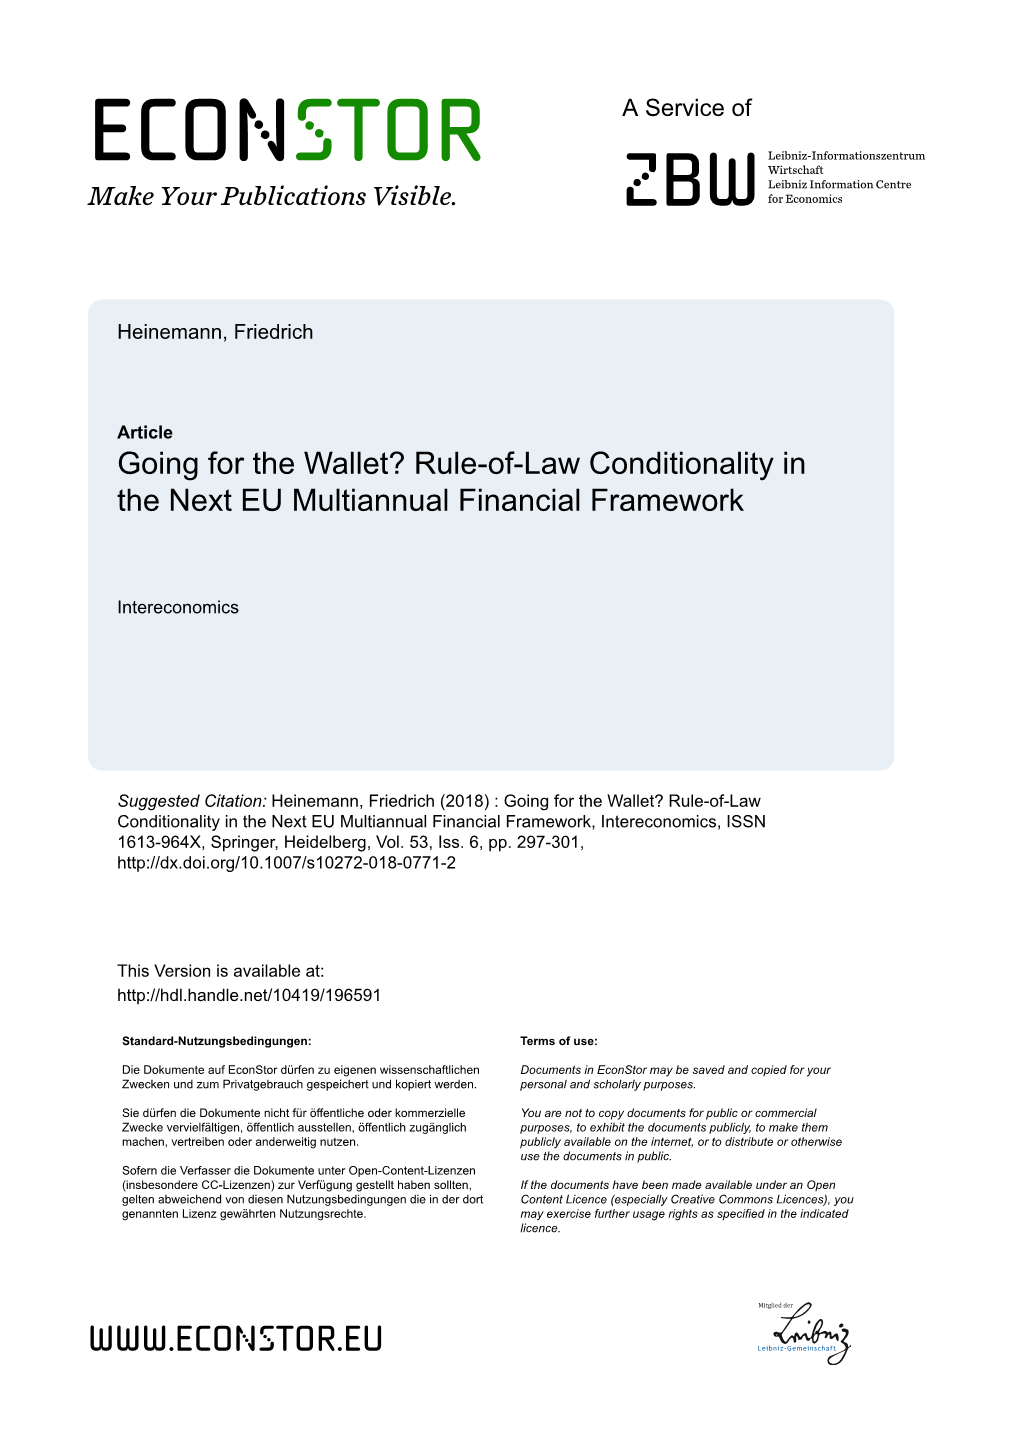 Rule-Of-Law Conditionality in the Next EU Multiannual Financial Framework